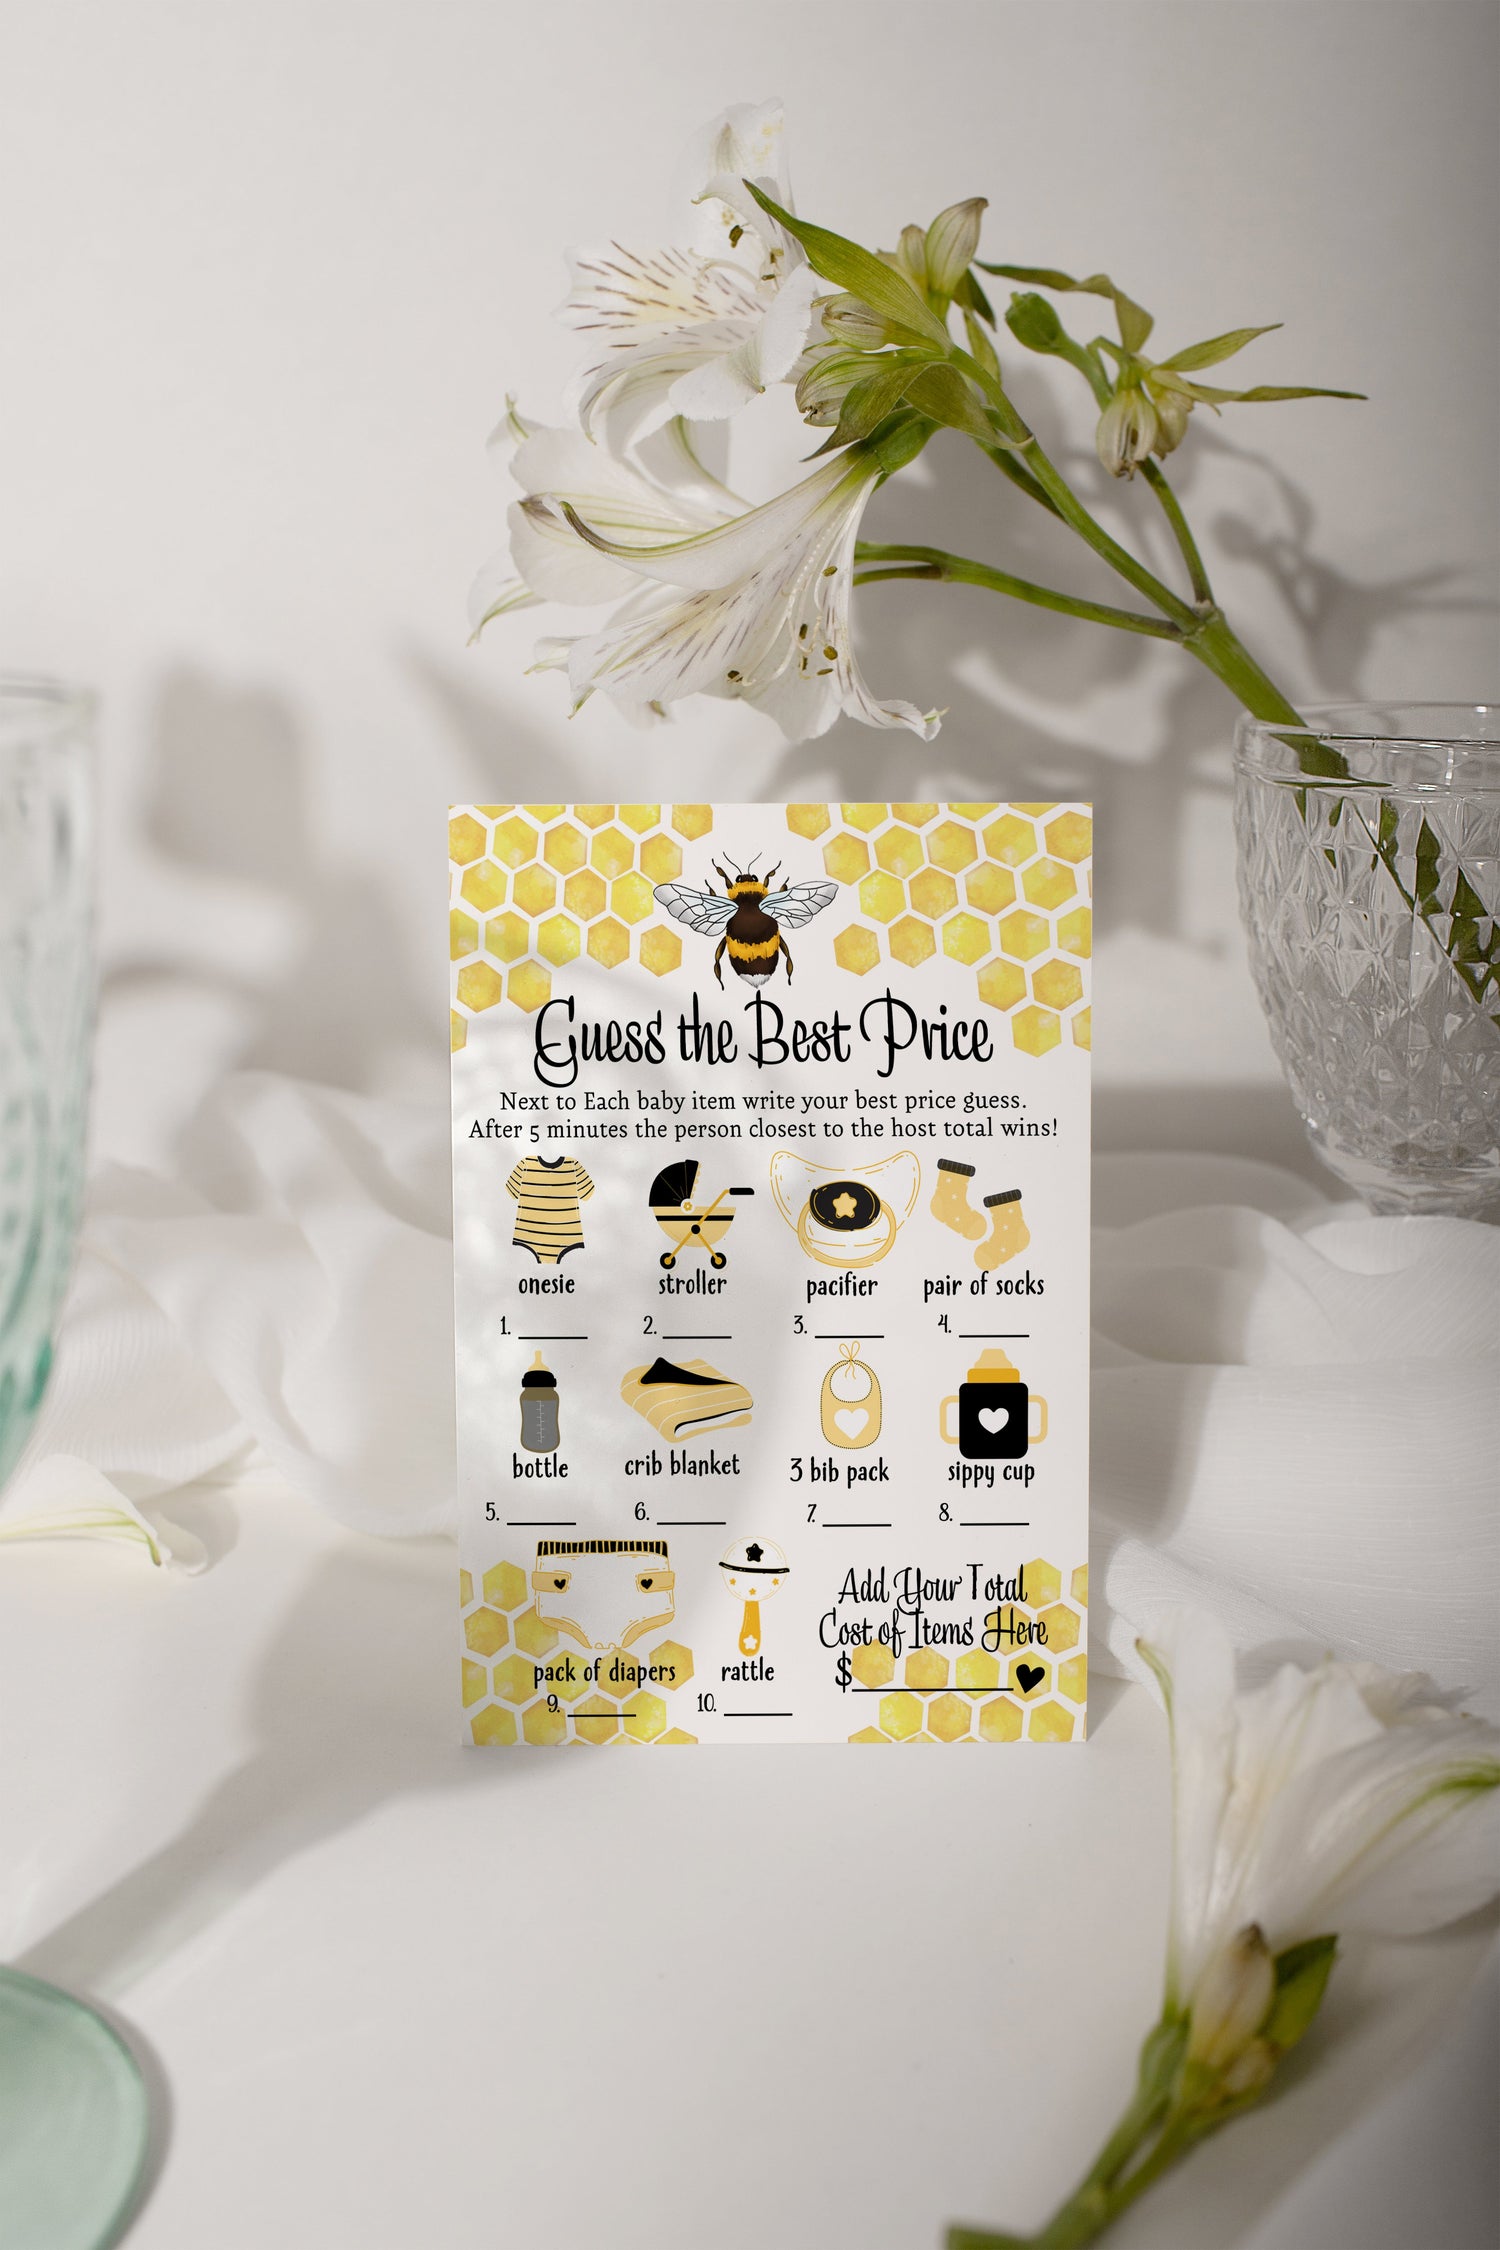 Celebrate the mom-to-bee with our Mama Bee Baby Shower theme! Buzz with excitement over our sweet selection of bee-inspired decor, games, and favors.